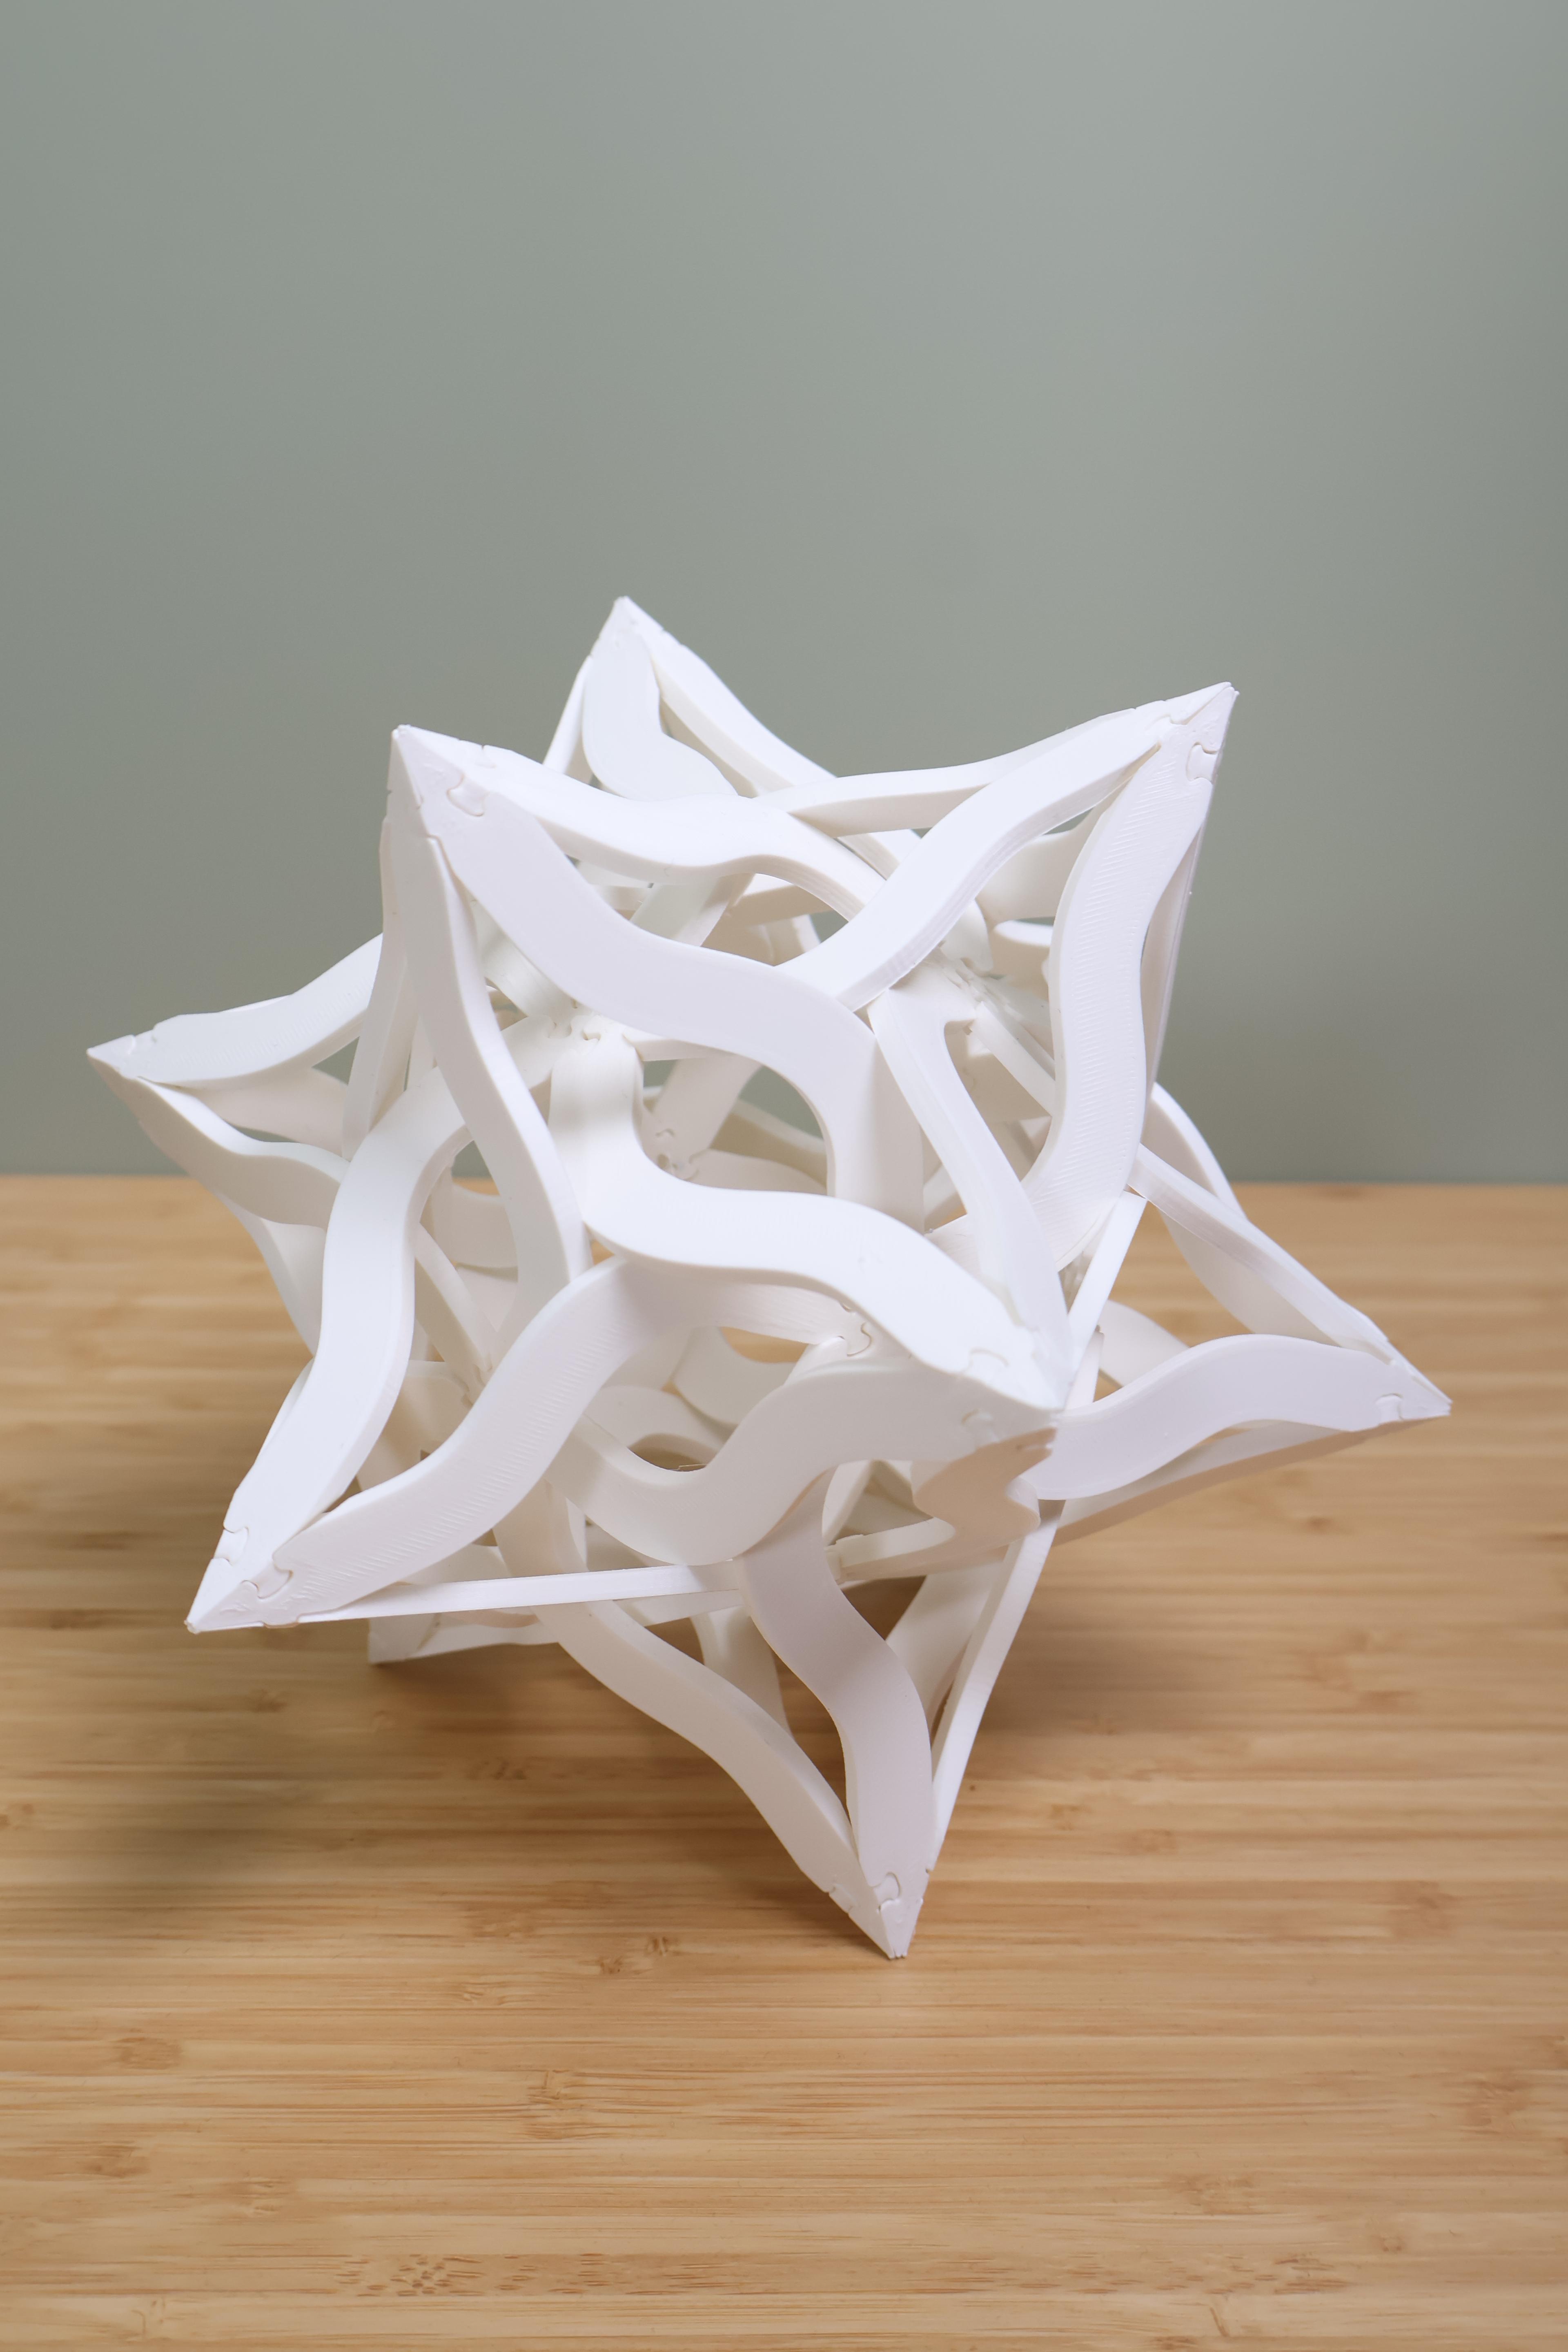 Stellated Dodecahedron Puzzle 3d model